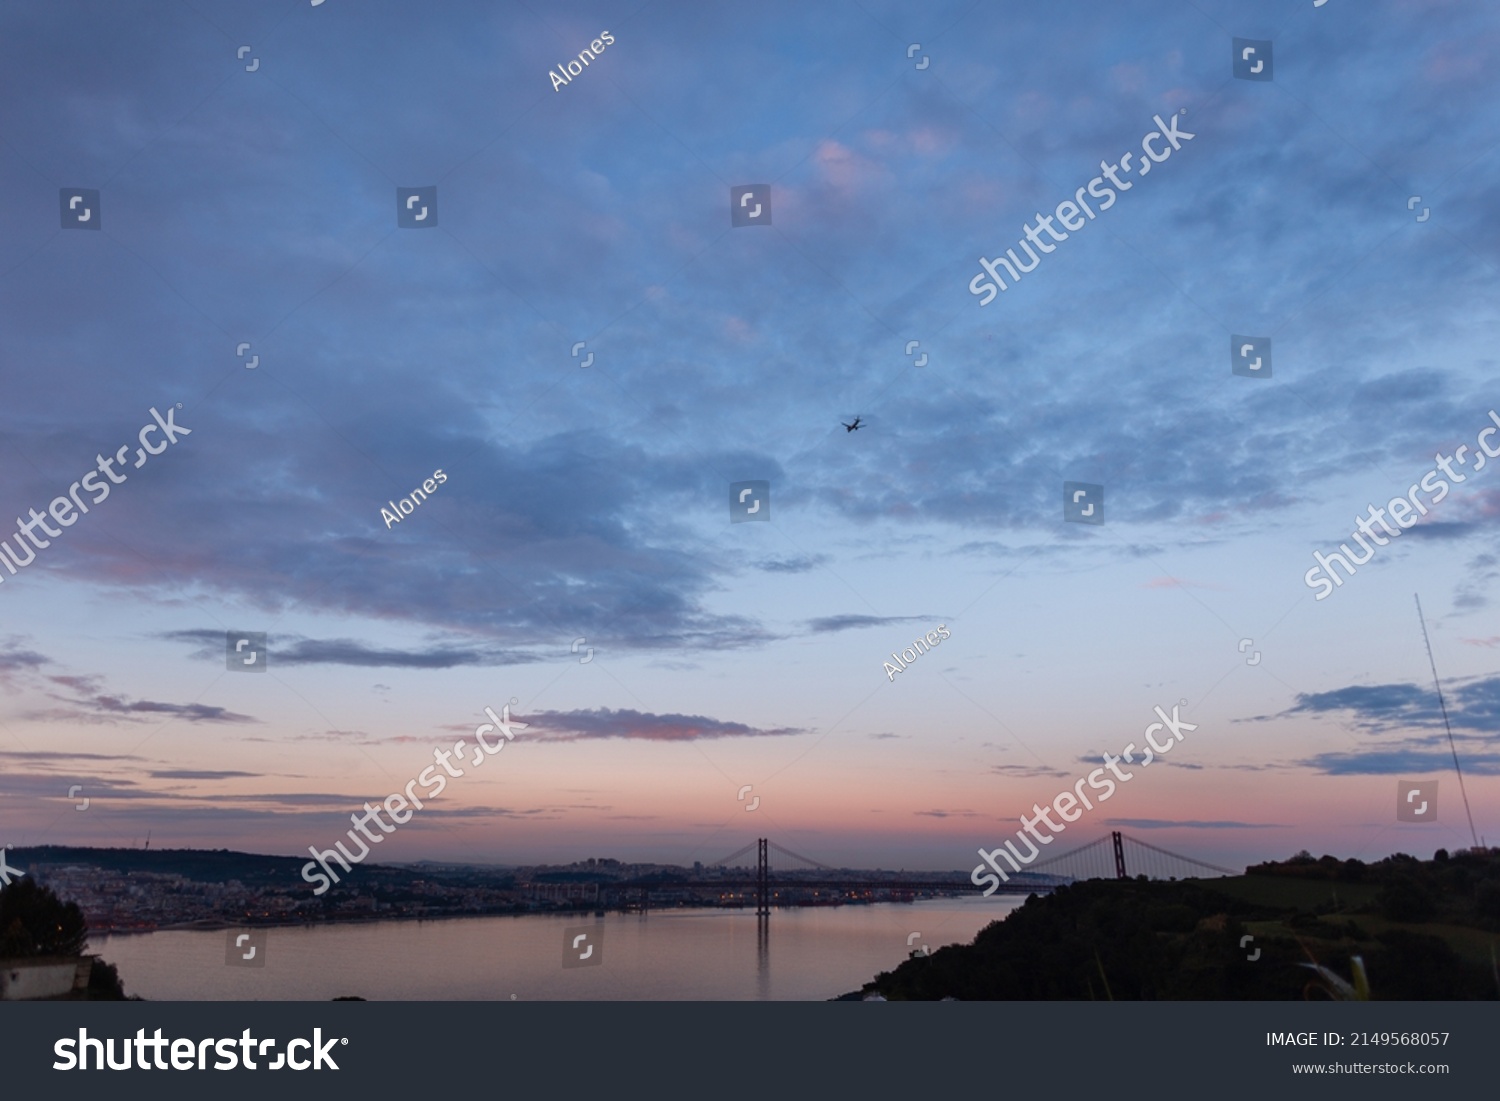 Beautiful European Lisbon, Portugal after sunset with evening sky and purple blue clouds. Evening cityscape with bridge, river and airplane  #2149568057